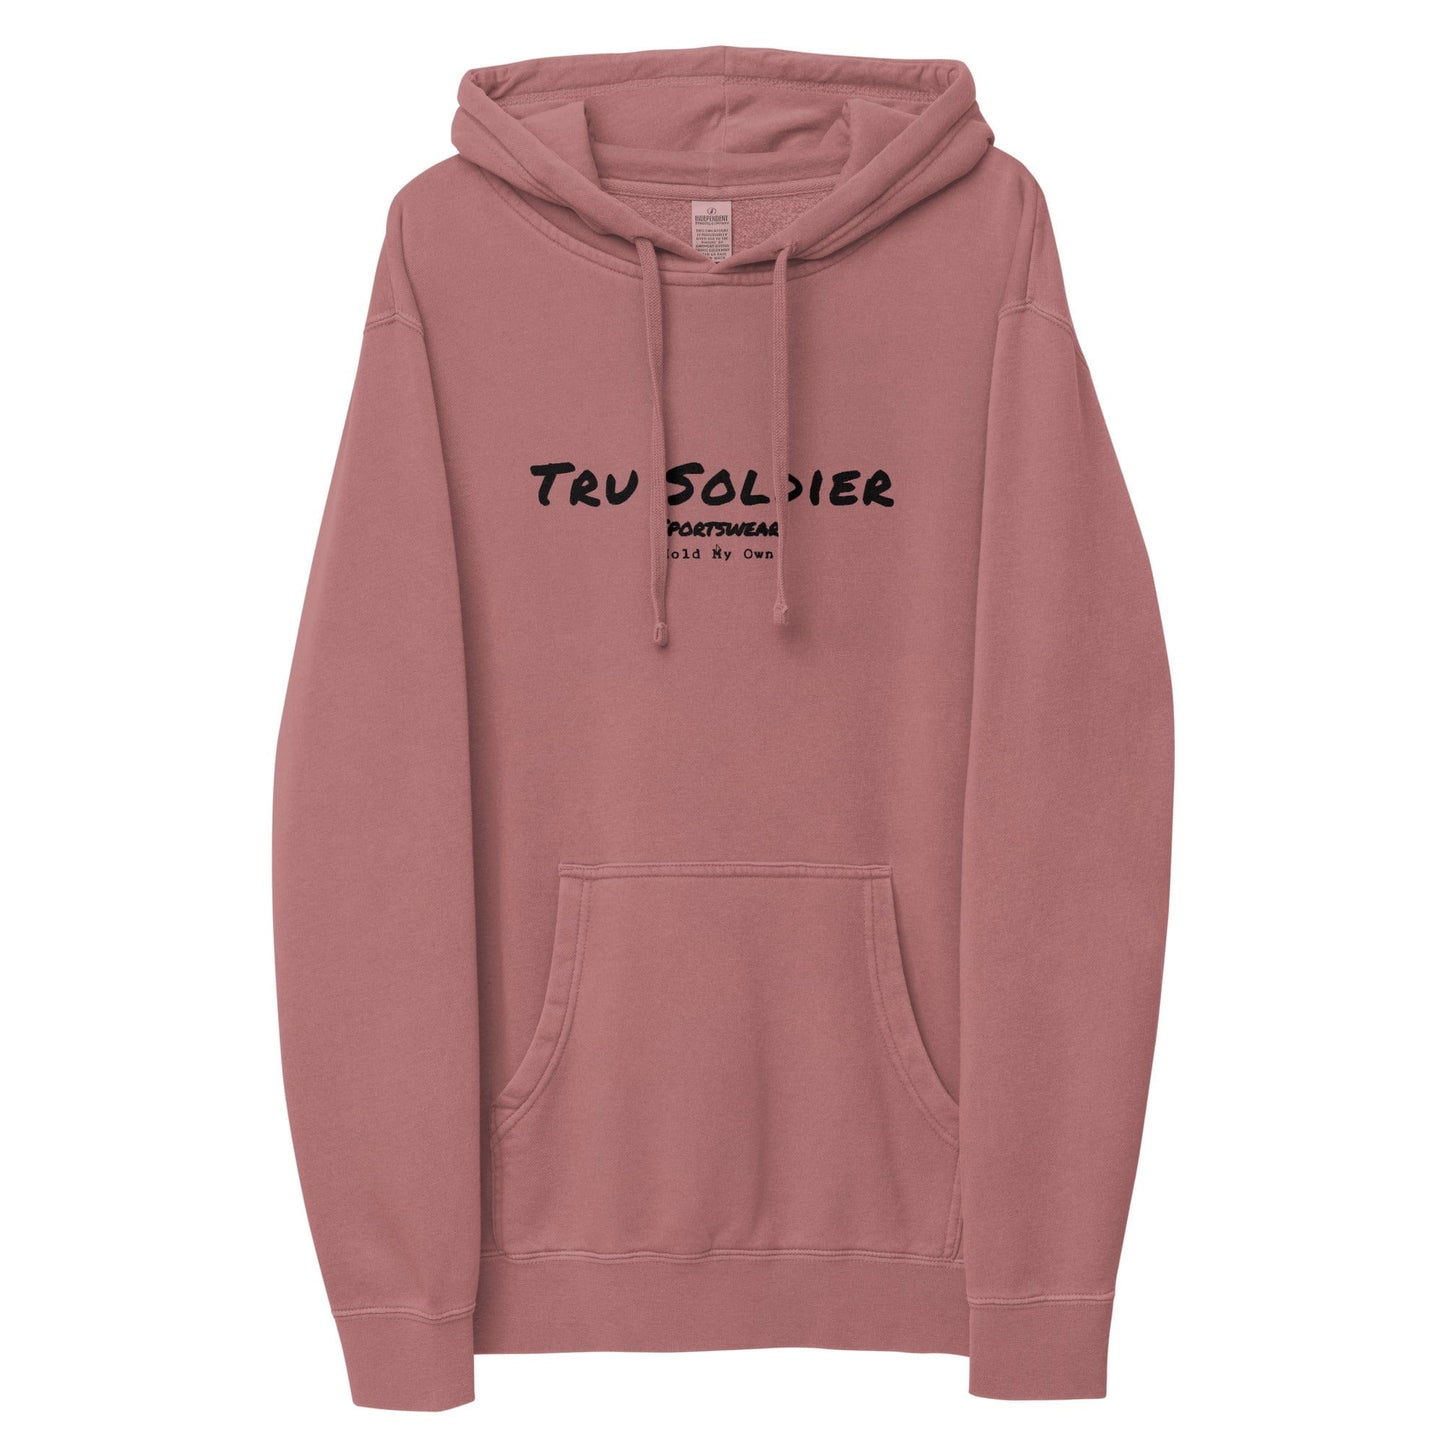 Tru Soldier Sportswear  Pigment Maroon / S Signature embroidered Unisex pigment-dyed hoodie